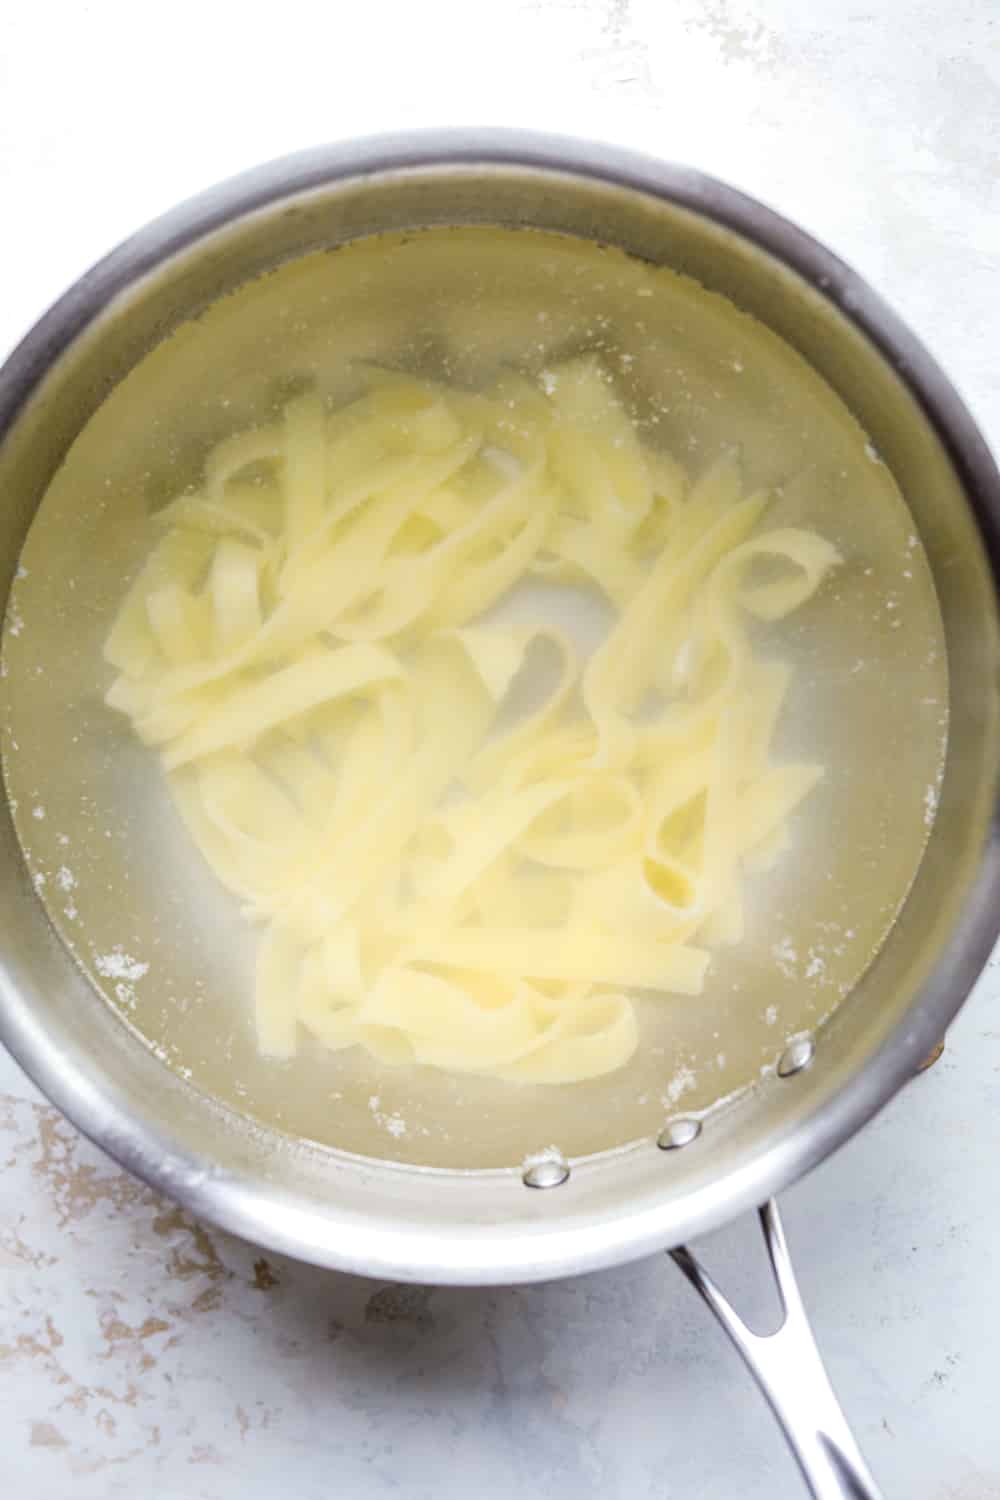 Pasta noodles in a pot of water.